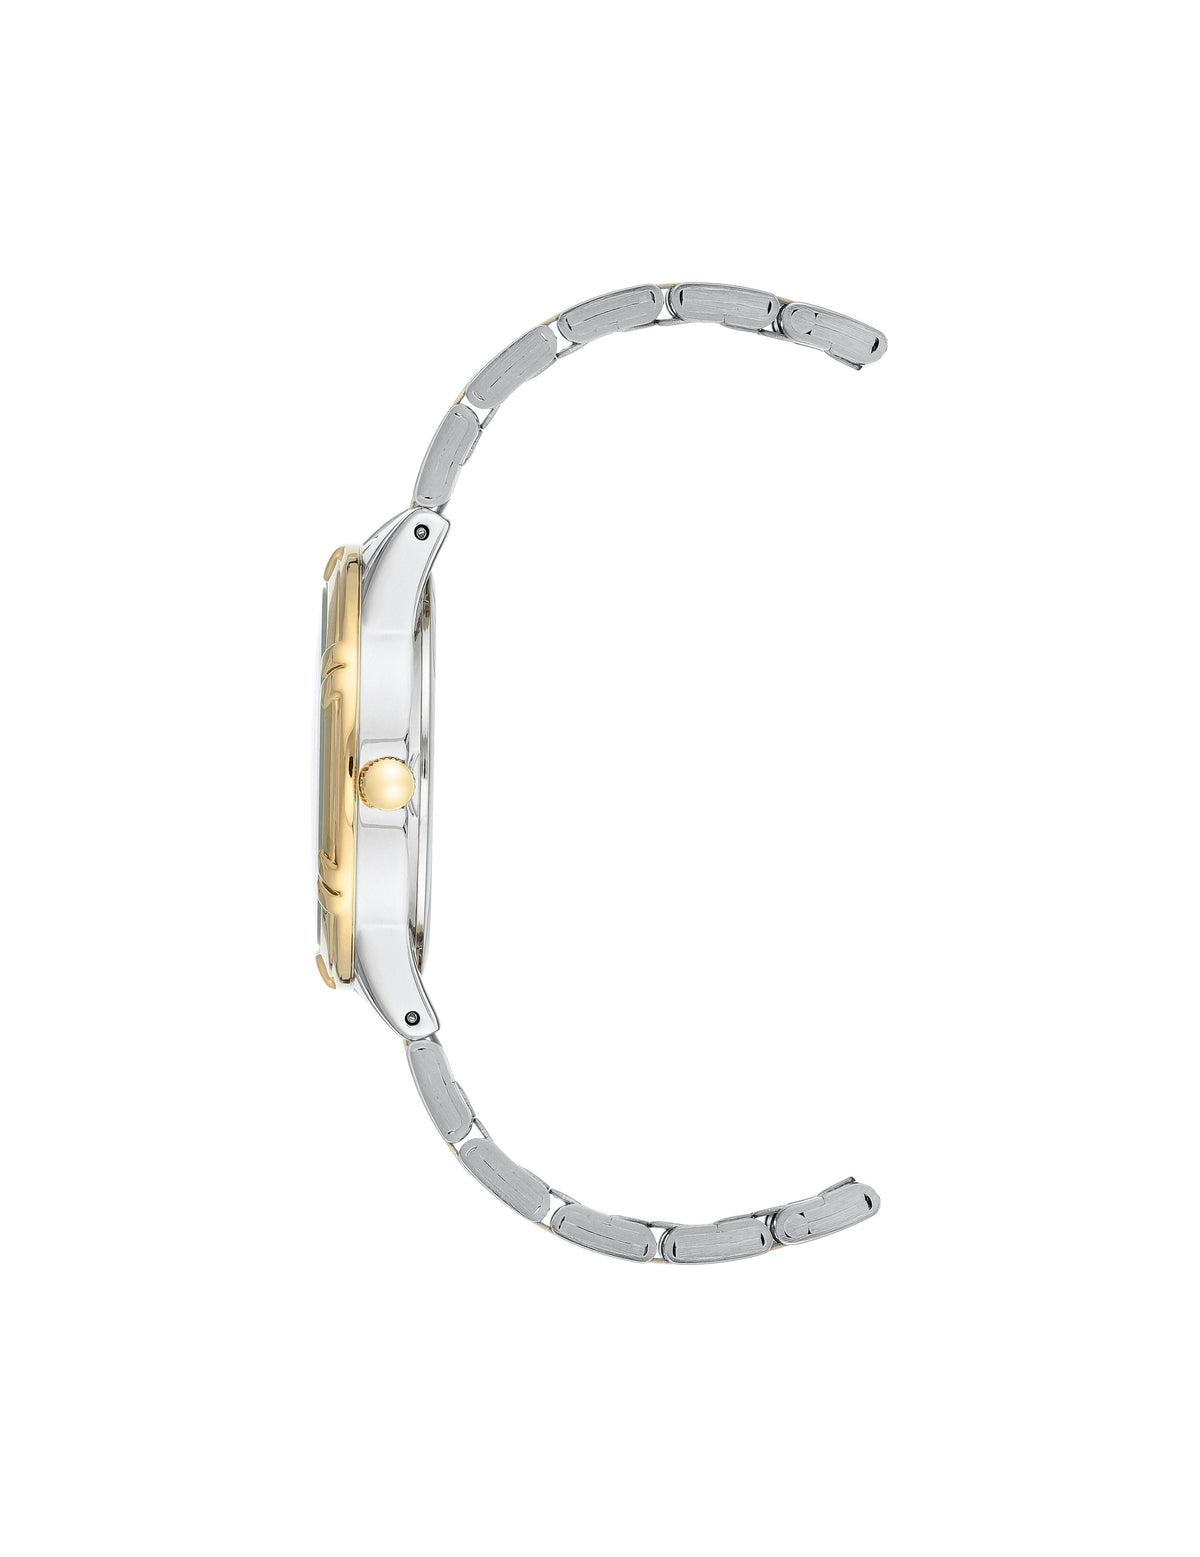 considered solar powered two tone swarovski crystal accented mother of pearl dial bracelet watch